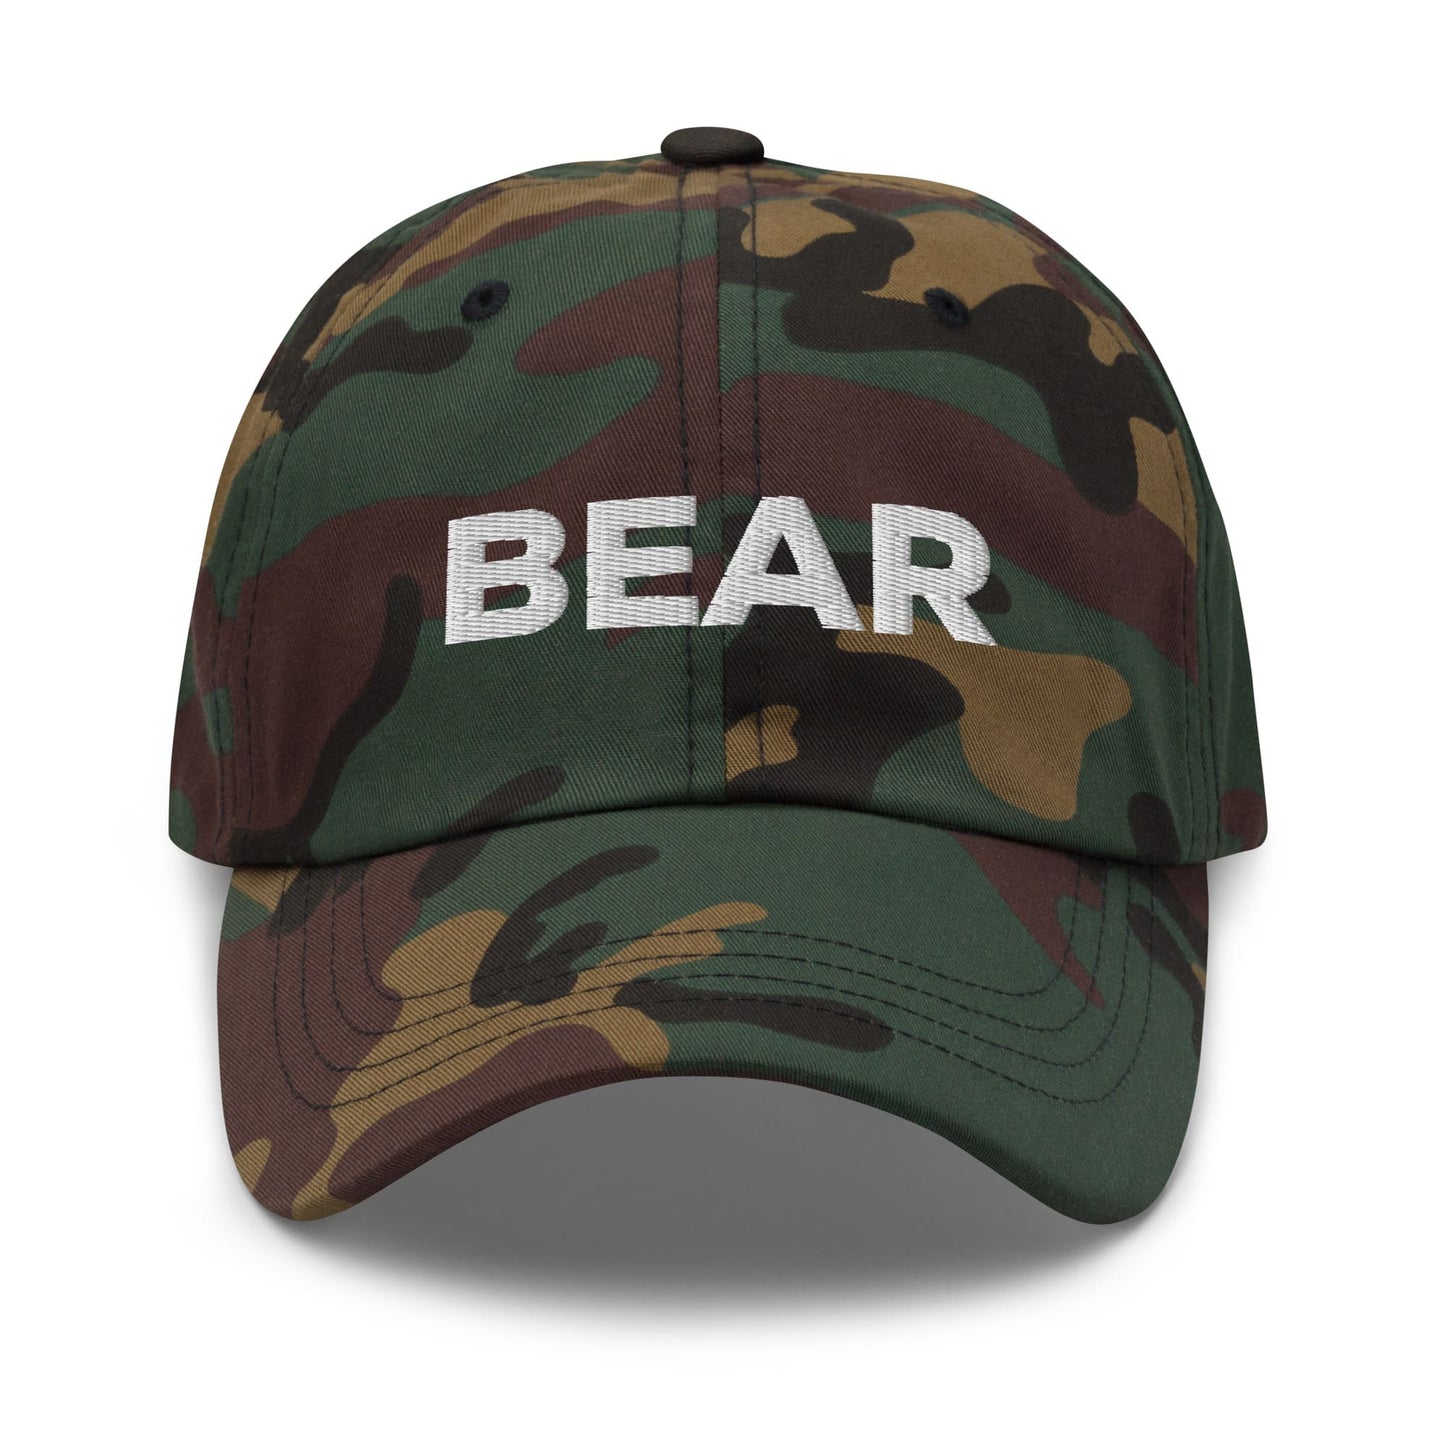 bear pride hat, embroidered gay bear cap, camouflage